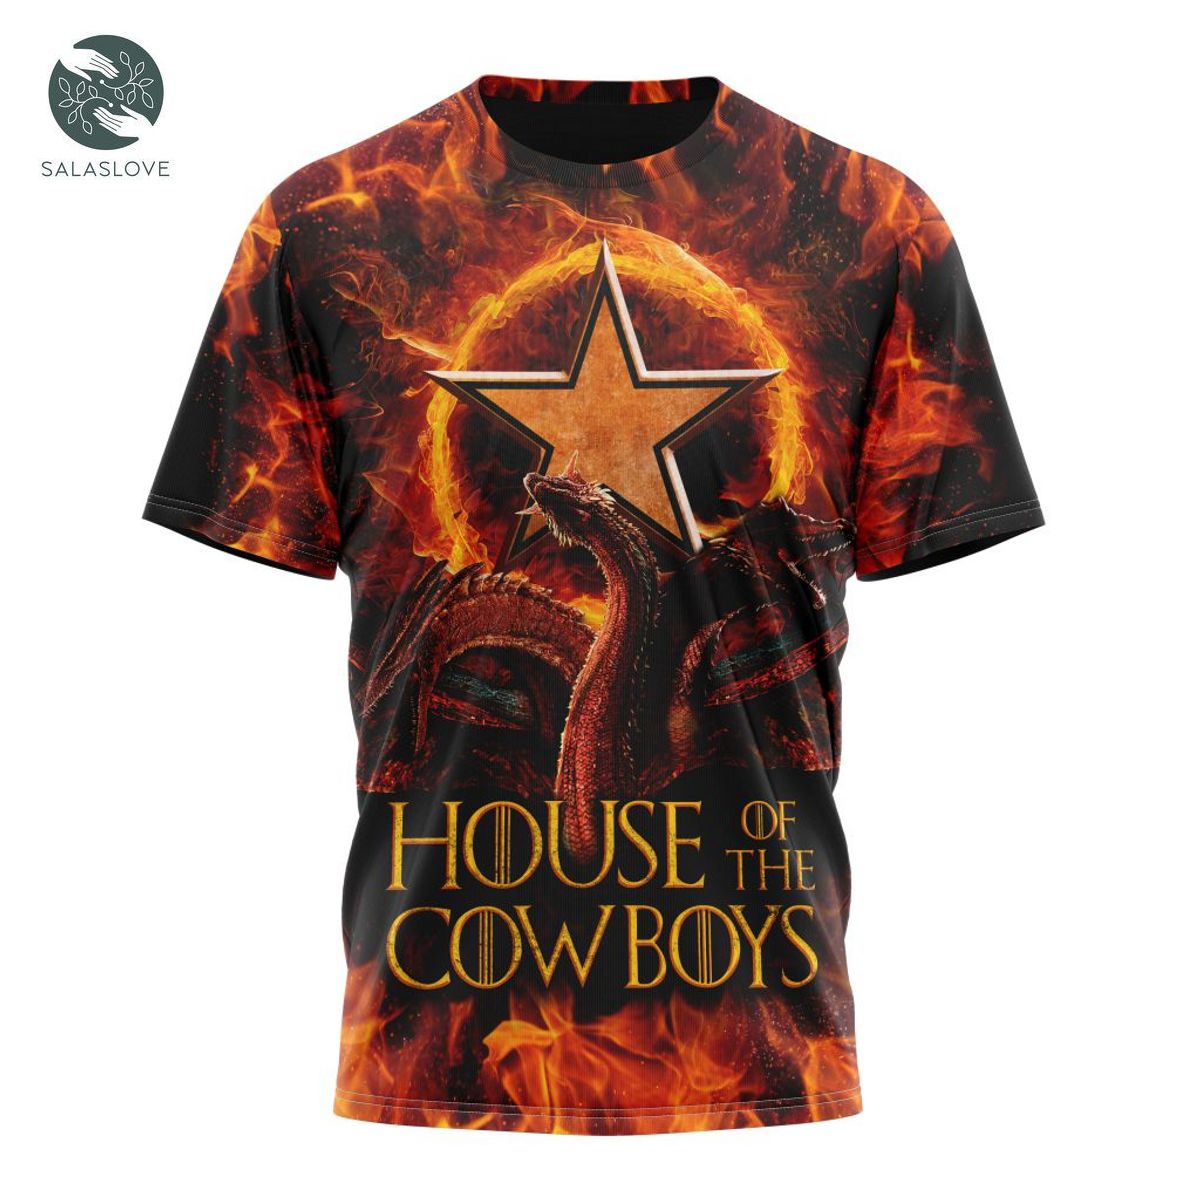 NFL Dallas Cowboys GAME OF THRONES – HOUSE OF THE COWBOYS Shirt